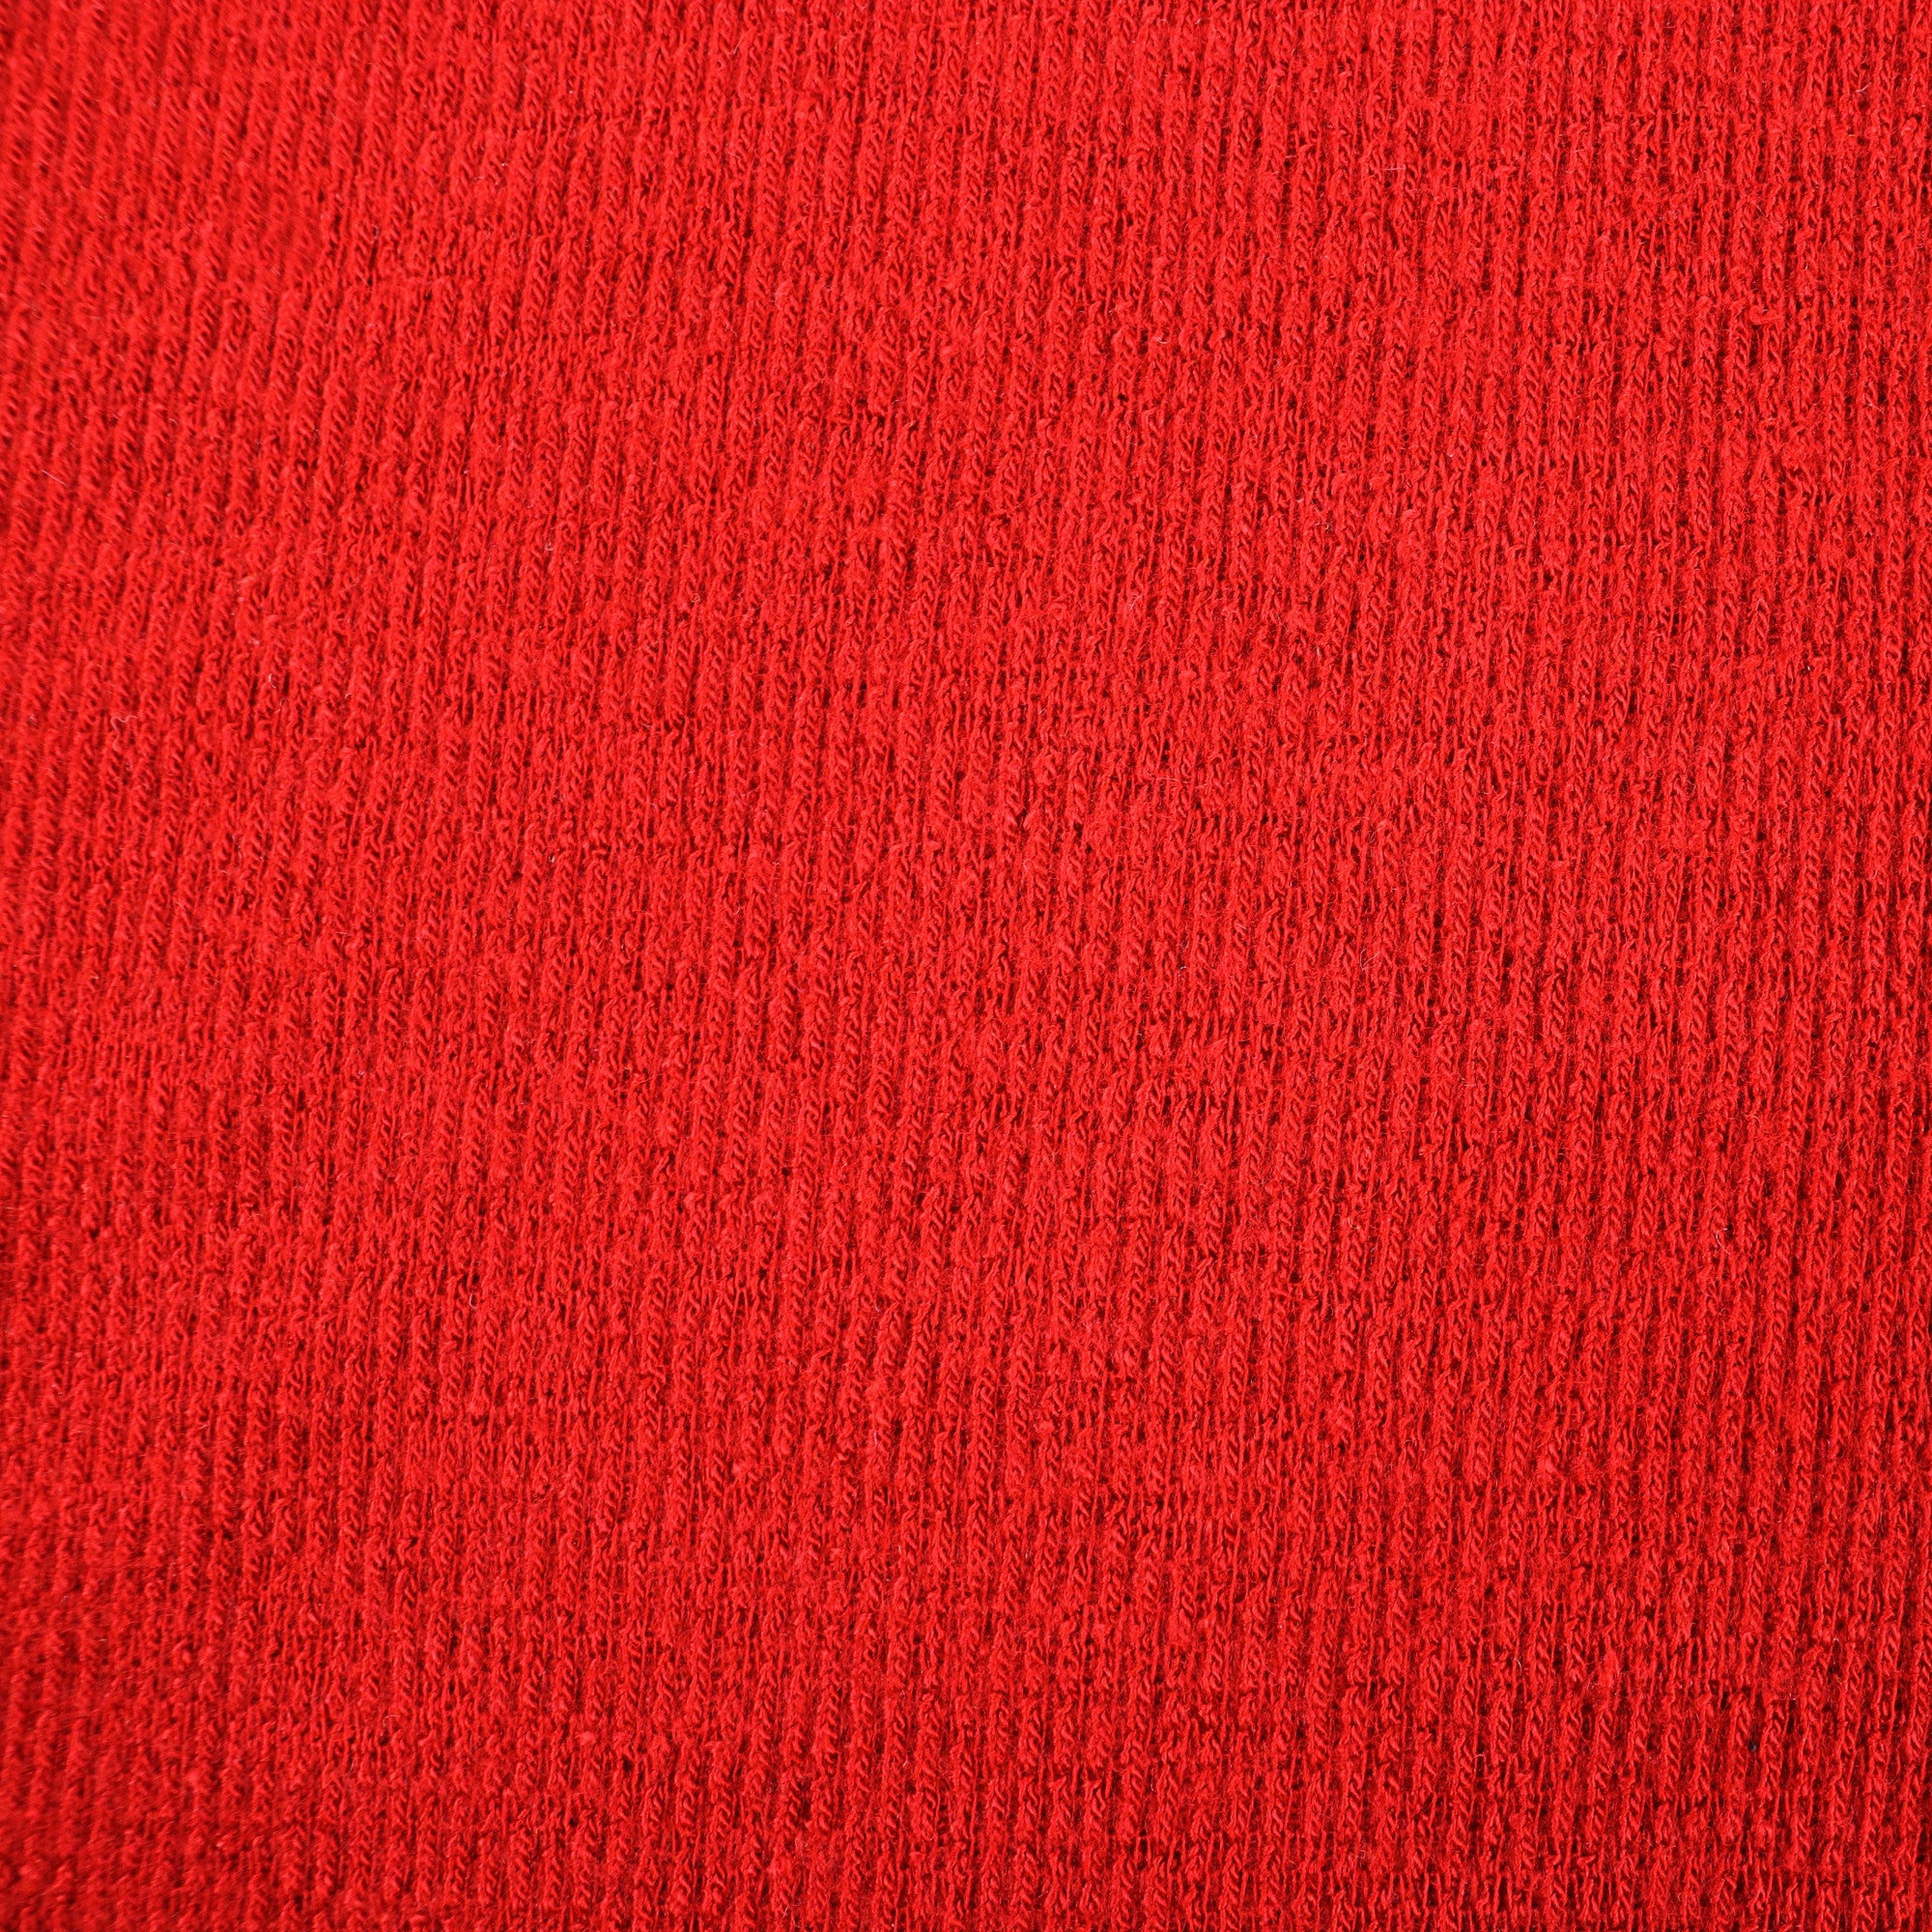 14-Colors POLYESTER/RAYON/SPANDEX Knit Fabric by the Yard, 58-60